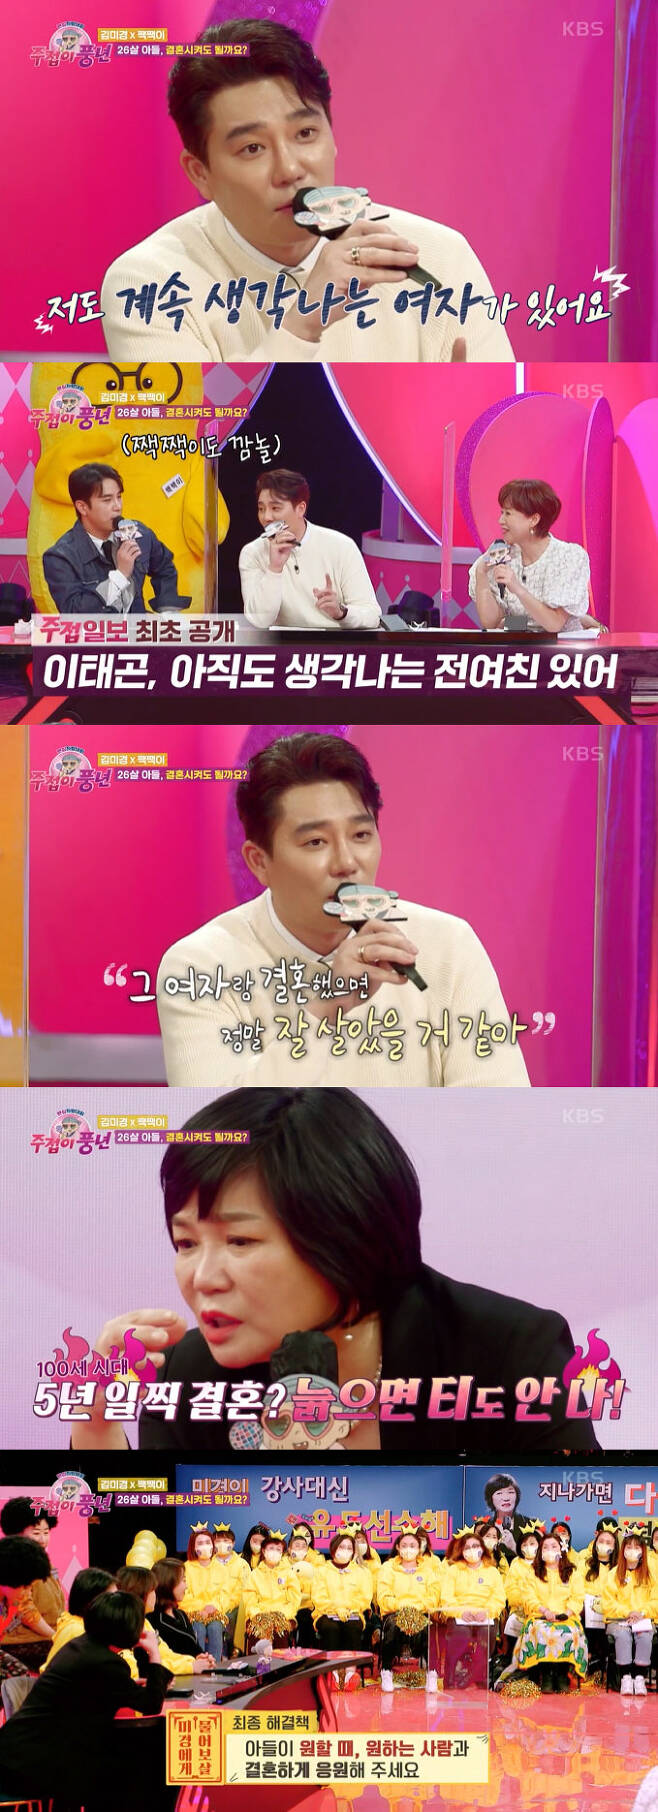 On the 10th KBS 2TV entertainment Fan heart pride contest a good harvest (hereinafter referred to as a good harvest), star lecturer Kim Mi-kyung and his main group appeared and had a special time.A fan of Kim Mi-kyung said, The wedding announcement of my son who came too early. Can I marry his 26-year-old son?Lee Tae-gon said, My son is a worker and I think I can get married because I have a living.I can not meet another woman who wants to marry, he said. I have a woman who keeps thinking about me.It was in my 20s, this is the first time Ive ever talked about it, I didnt know she was such a good woman then.But later on, I thought that if I lived with her, I would have lived really well. I hesitated to marry because I thought I was too young.Oh, I think this is a missed one, he confessed.Can you contact him? Lee Tae-gon said, No, and said, I heard that I was married. There are men like that.I think a lot about getting married when Im settled and stable. I tell my juniors what I say is, I can not marry forever.I am not satisfied with the position, so when I see (the son of the story), I have a job and I think I will get through it well. Kim Mi-kyung also said: For my son, 26 could be the right age for marriage; the idea that the right age for marriage is in their early 30s is just the idea of mothers, we live 100 years.If you get married five years early, you will not get old. You can cheer up to marry someone you want most. 